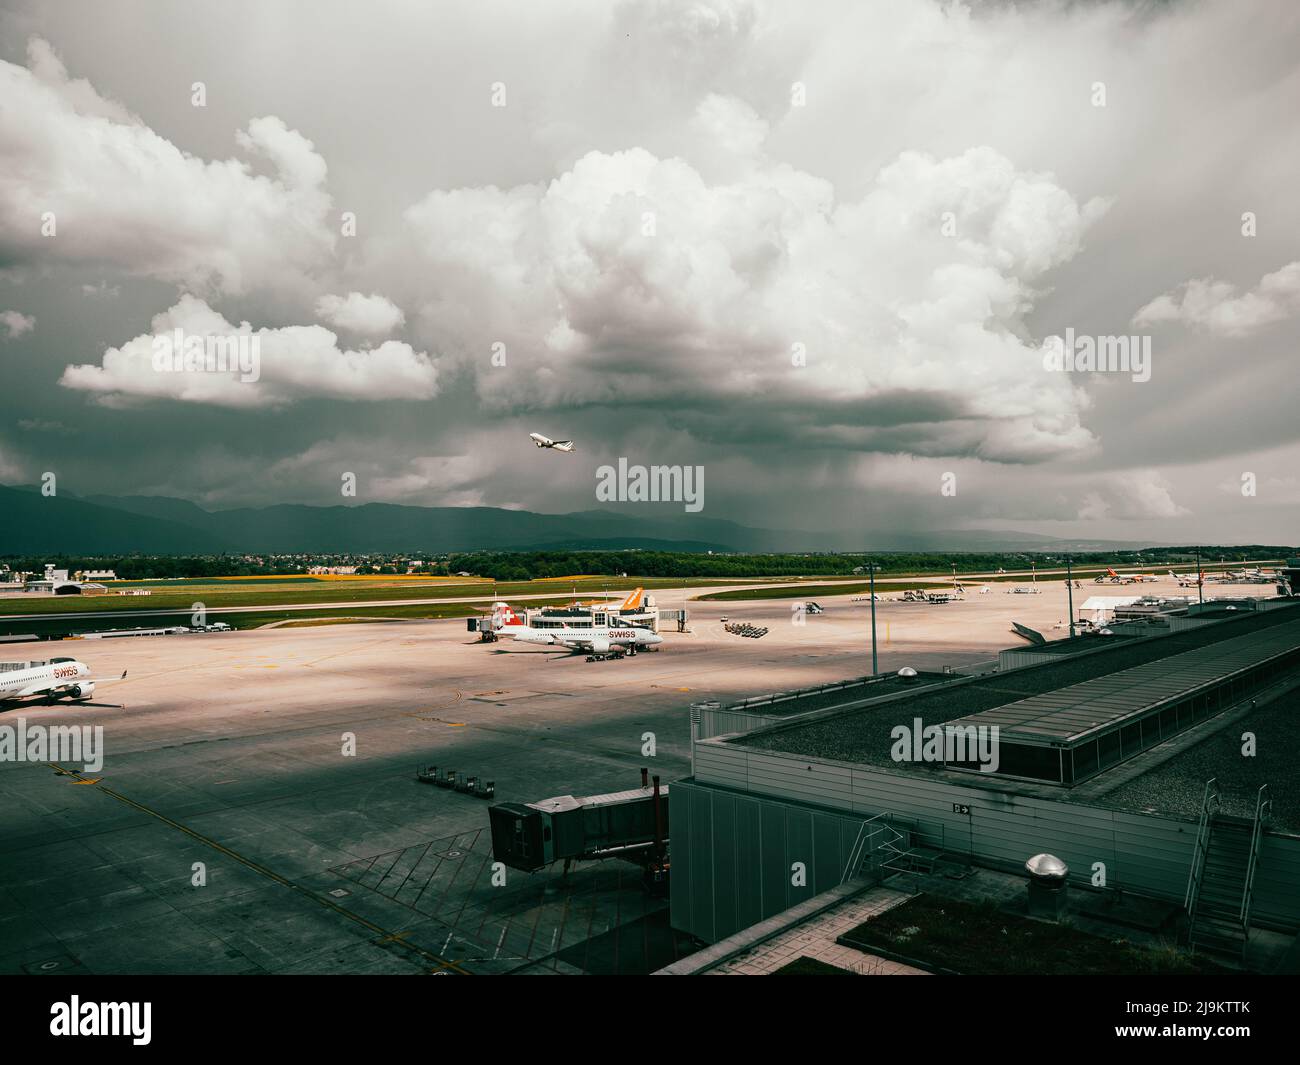 Airport of Geneva, Switzerland. Planes and service vehicles stand on the runway and taxiway of Geneva airport in Switzerland. Stock Photo